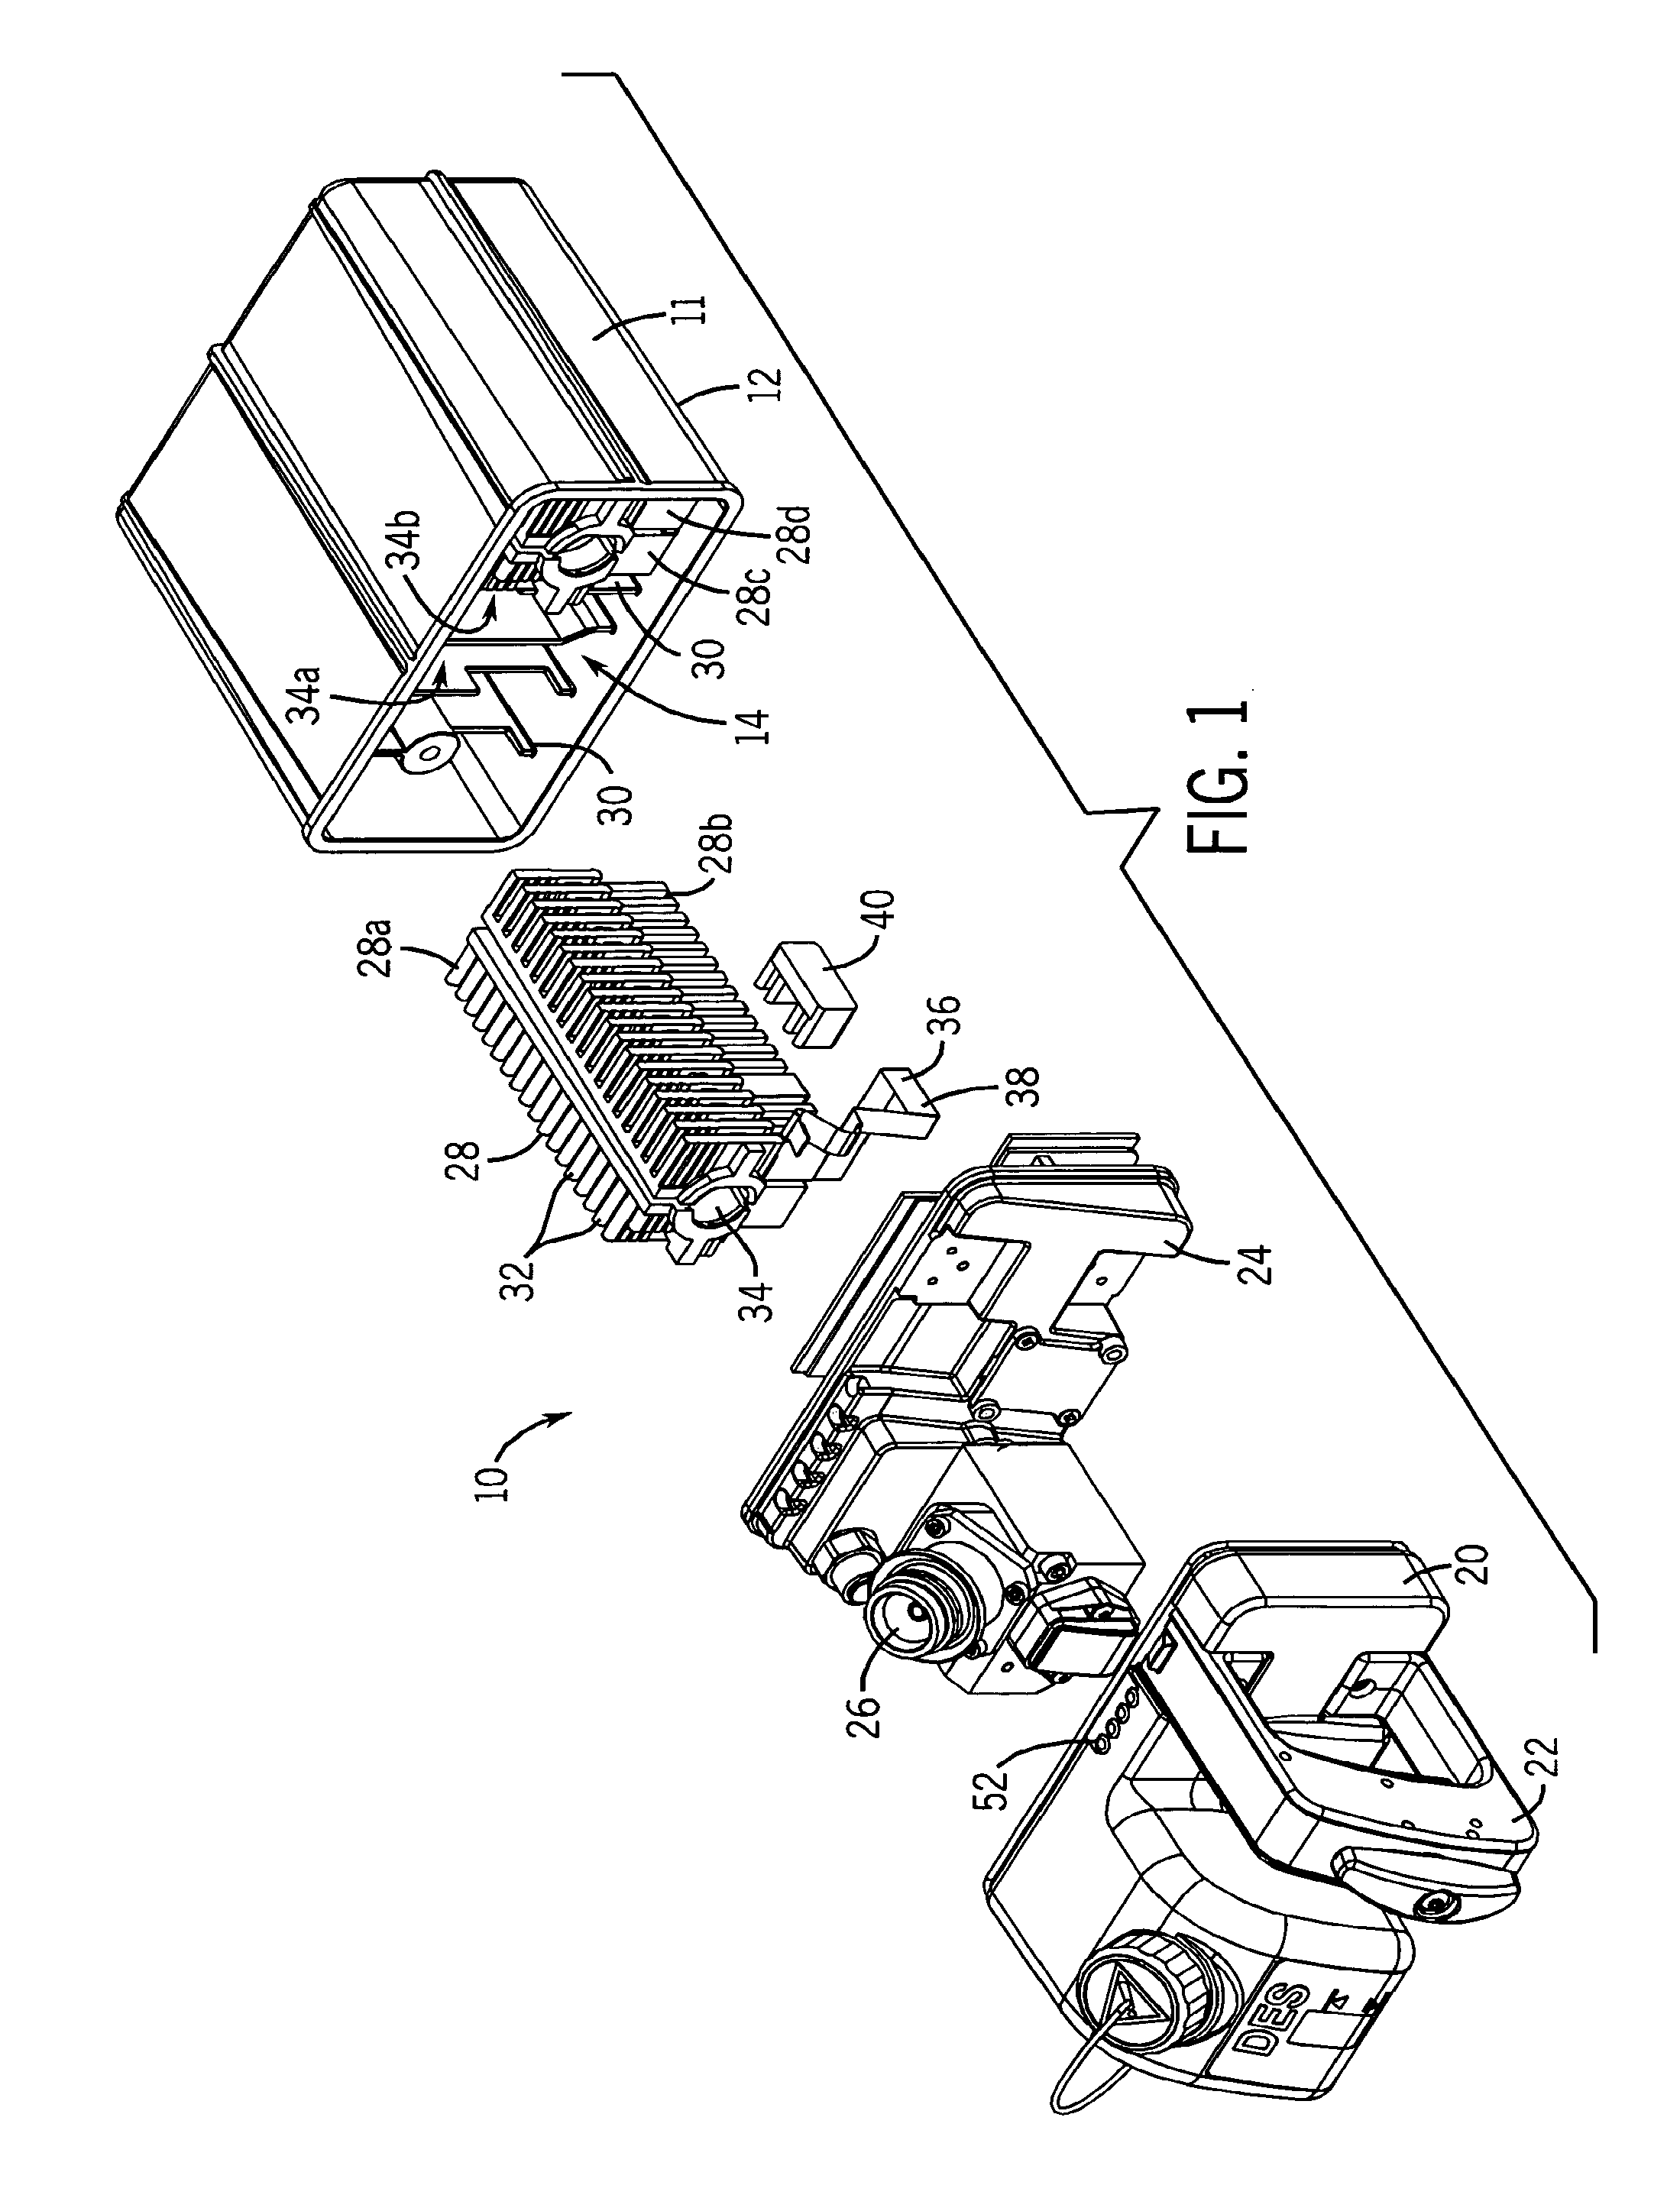 Anesthetic agent cassette for an anesthesia machine